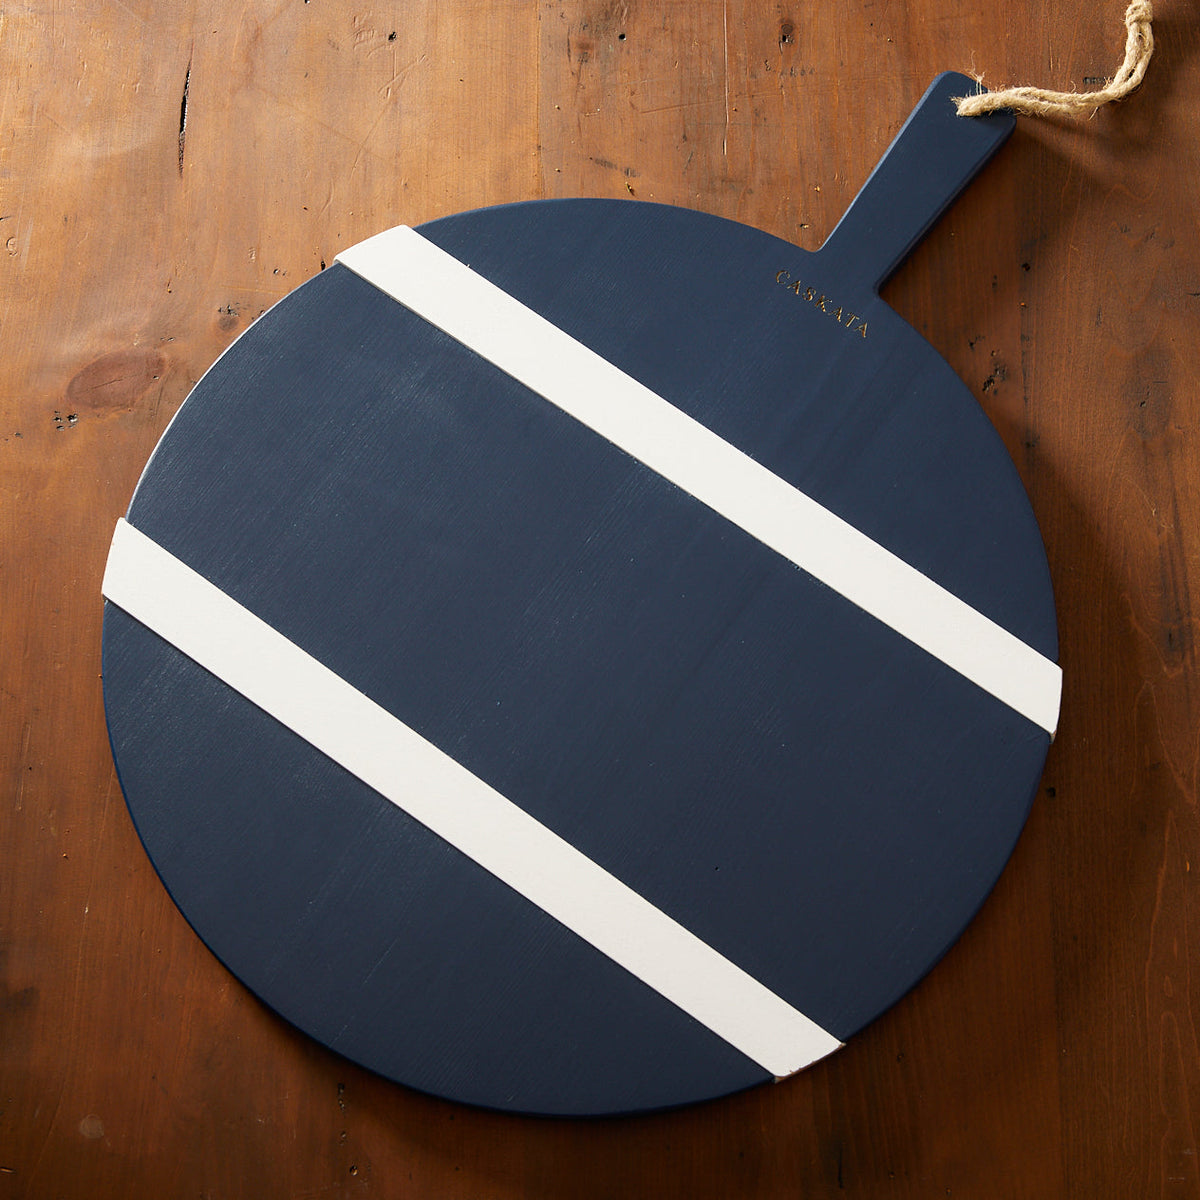 A big Navy and White Round Charcuterie Big Board with a wood grain pattern on a wooden table, perfect for holiday entertaining.